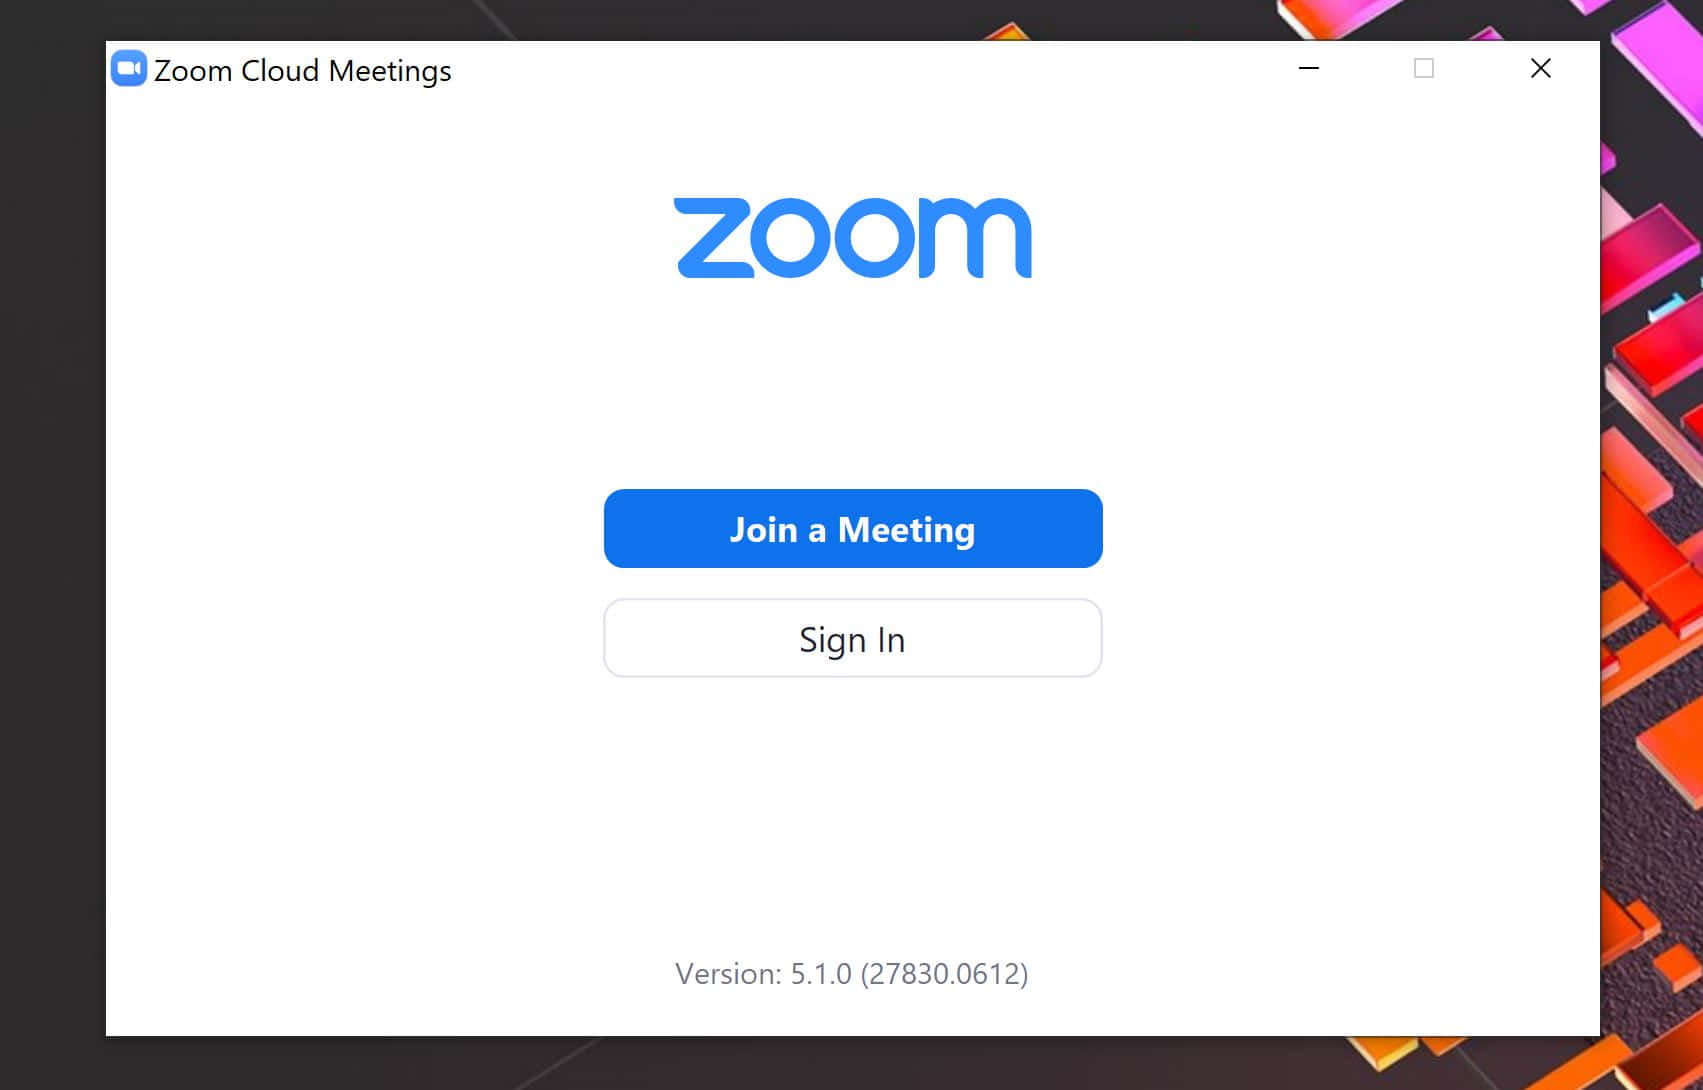 Zoom Meeting: Working Together, Even Apart